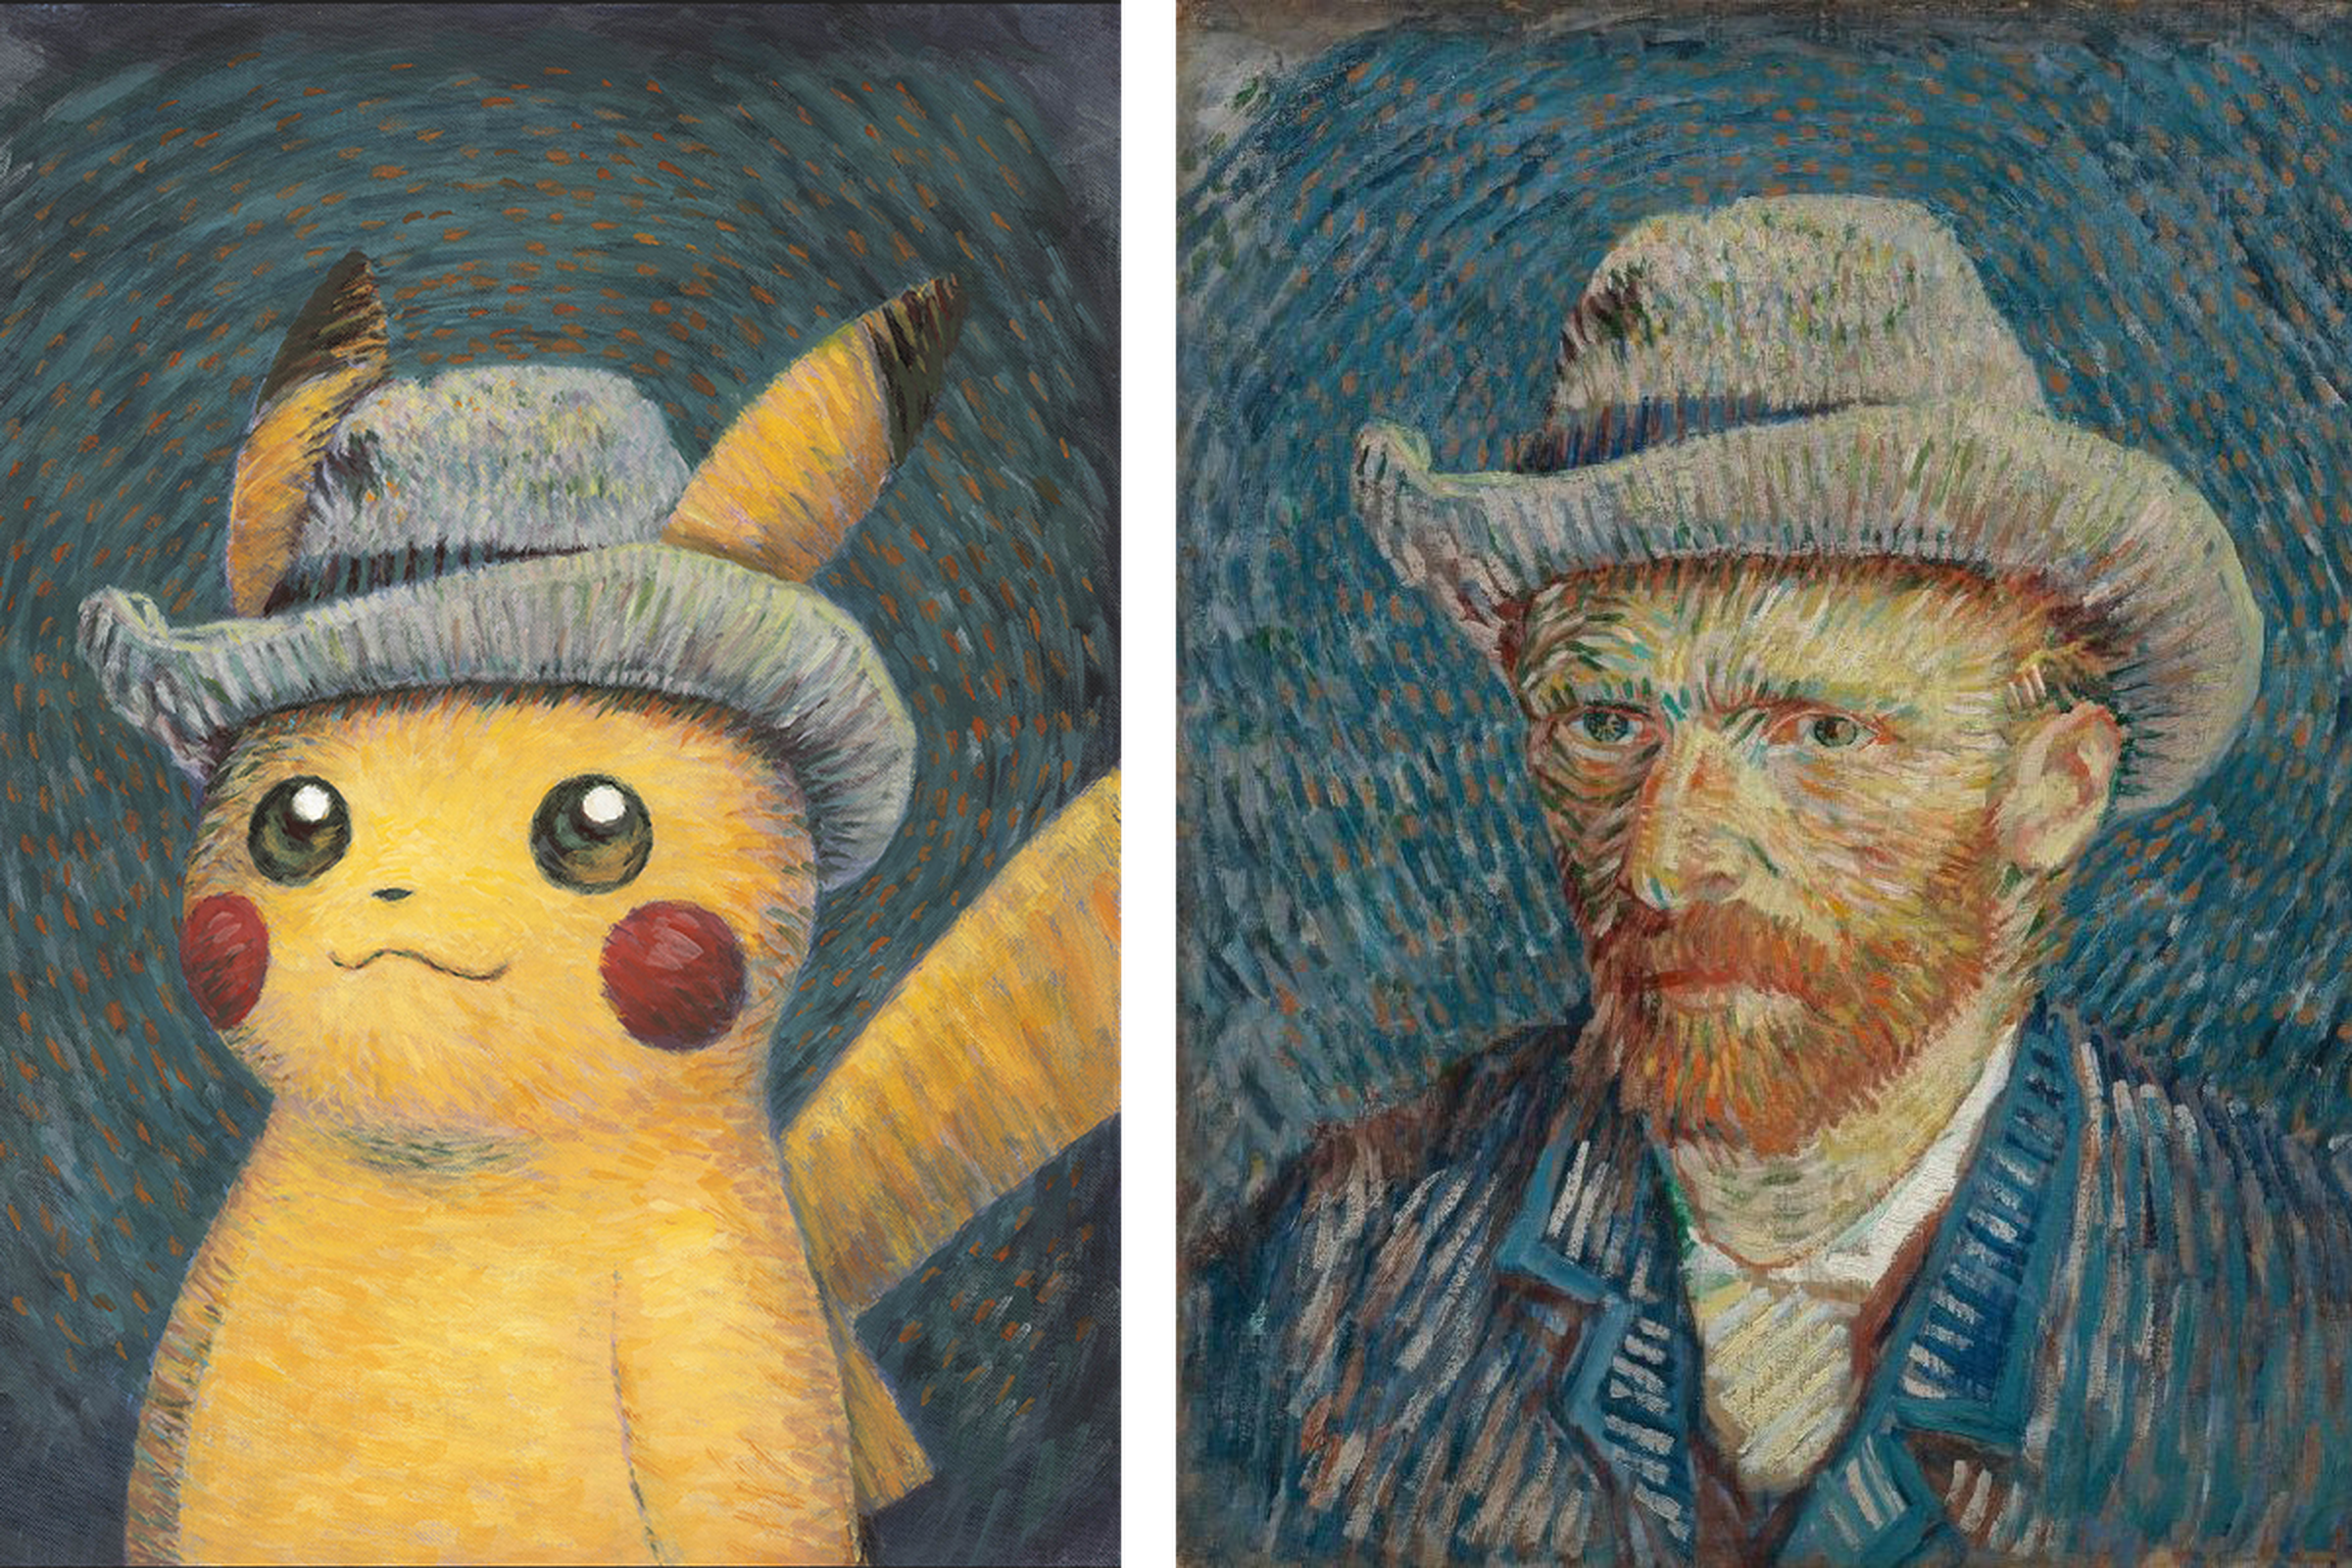 On the left, a painting of a Pikachu in the style of Vincent Van Gogh’s ‘Self Portrait with Grey Felt Hat.” On the right, Vincent Van Gogh’s ‘Self Portrait with Grey Felt Hat.”